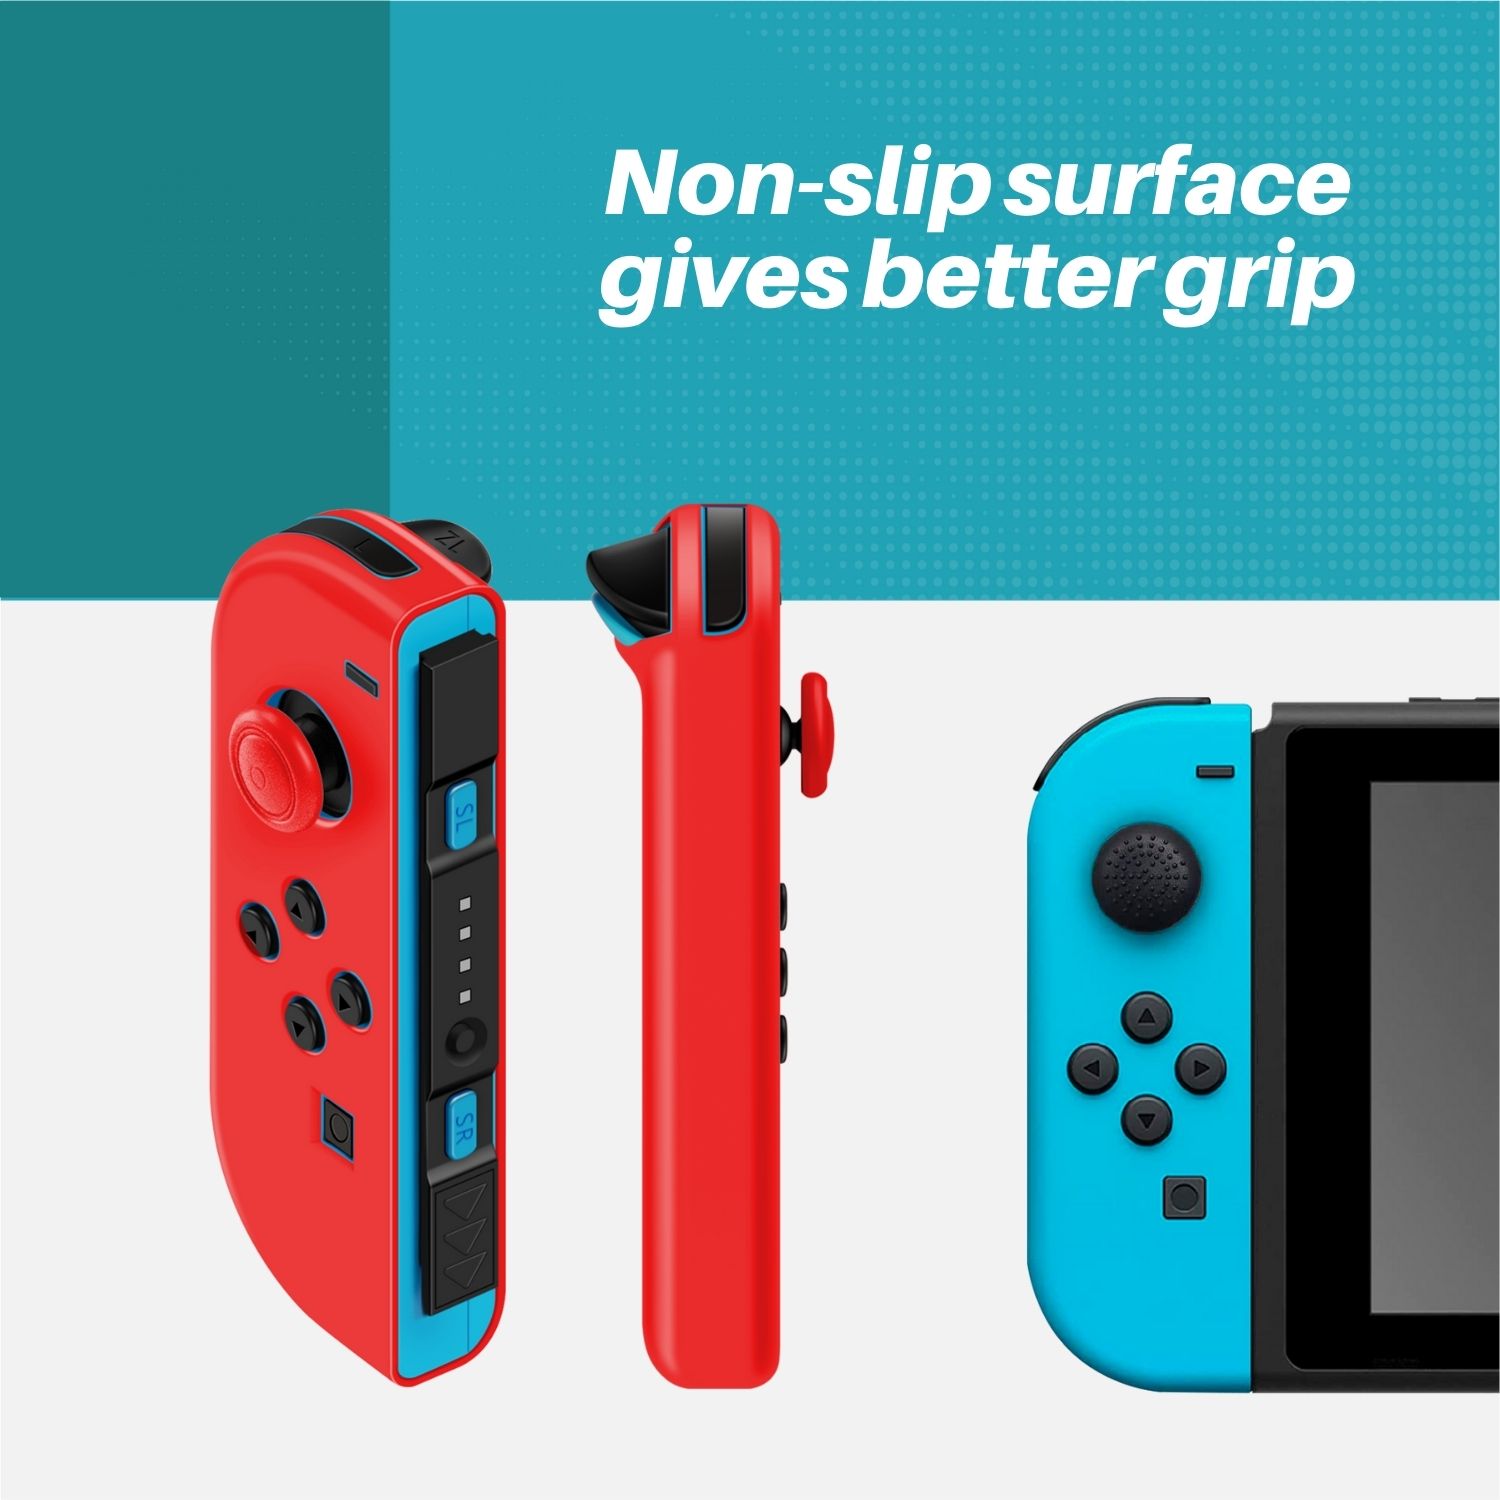 The soft material acts as a protective barrier to minimize surface damage, for example, when placing the Joy-Cons down on a hard surface such as a table